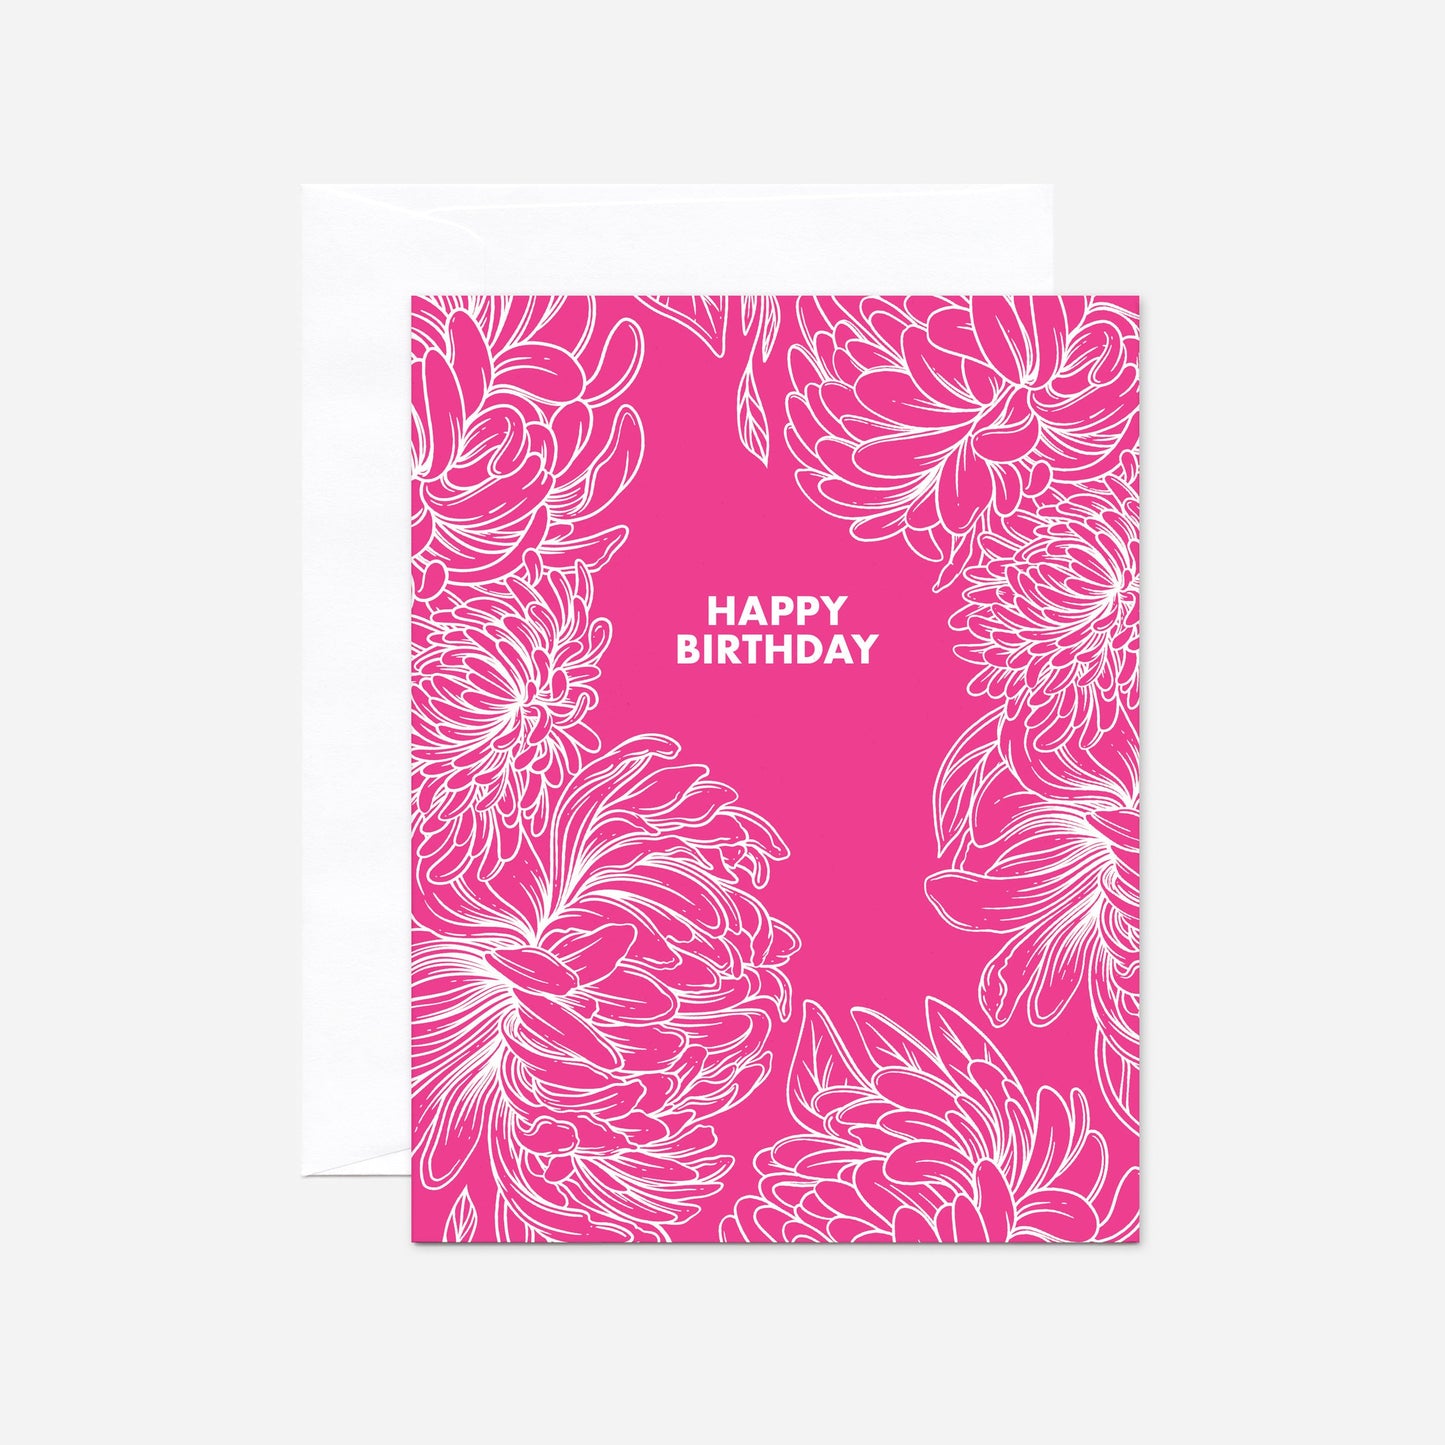 Set of 8 of "Pink Flowers" Birthday Greeting Cards